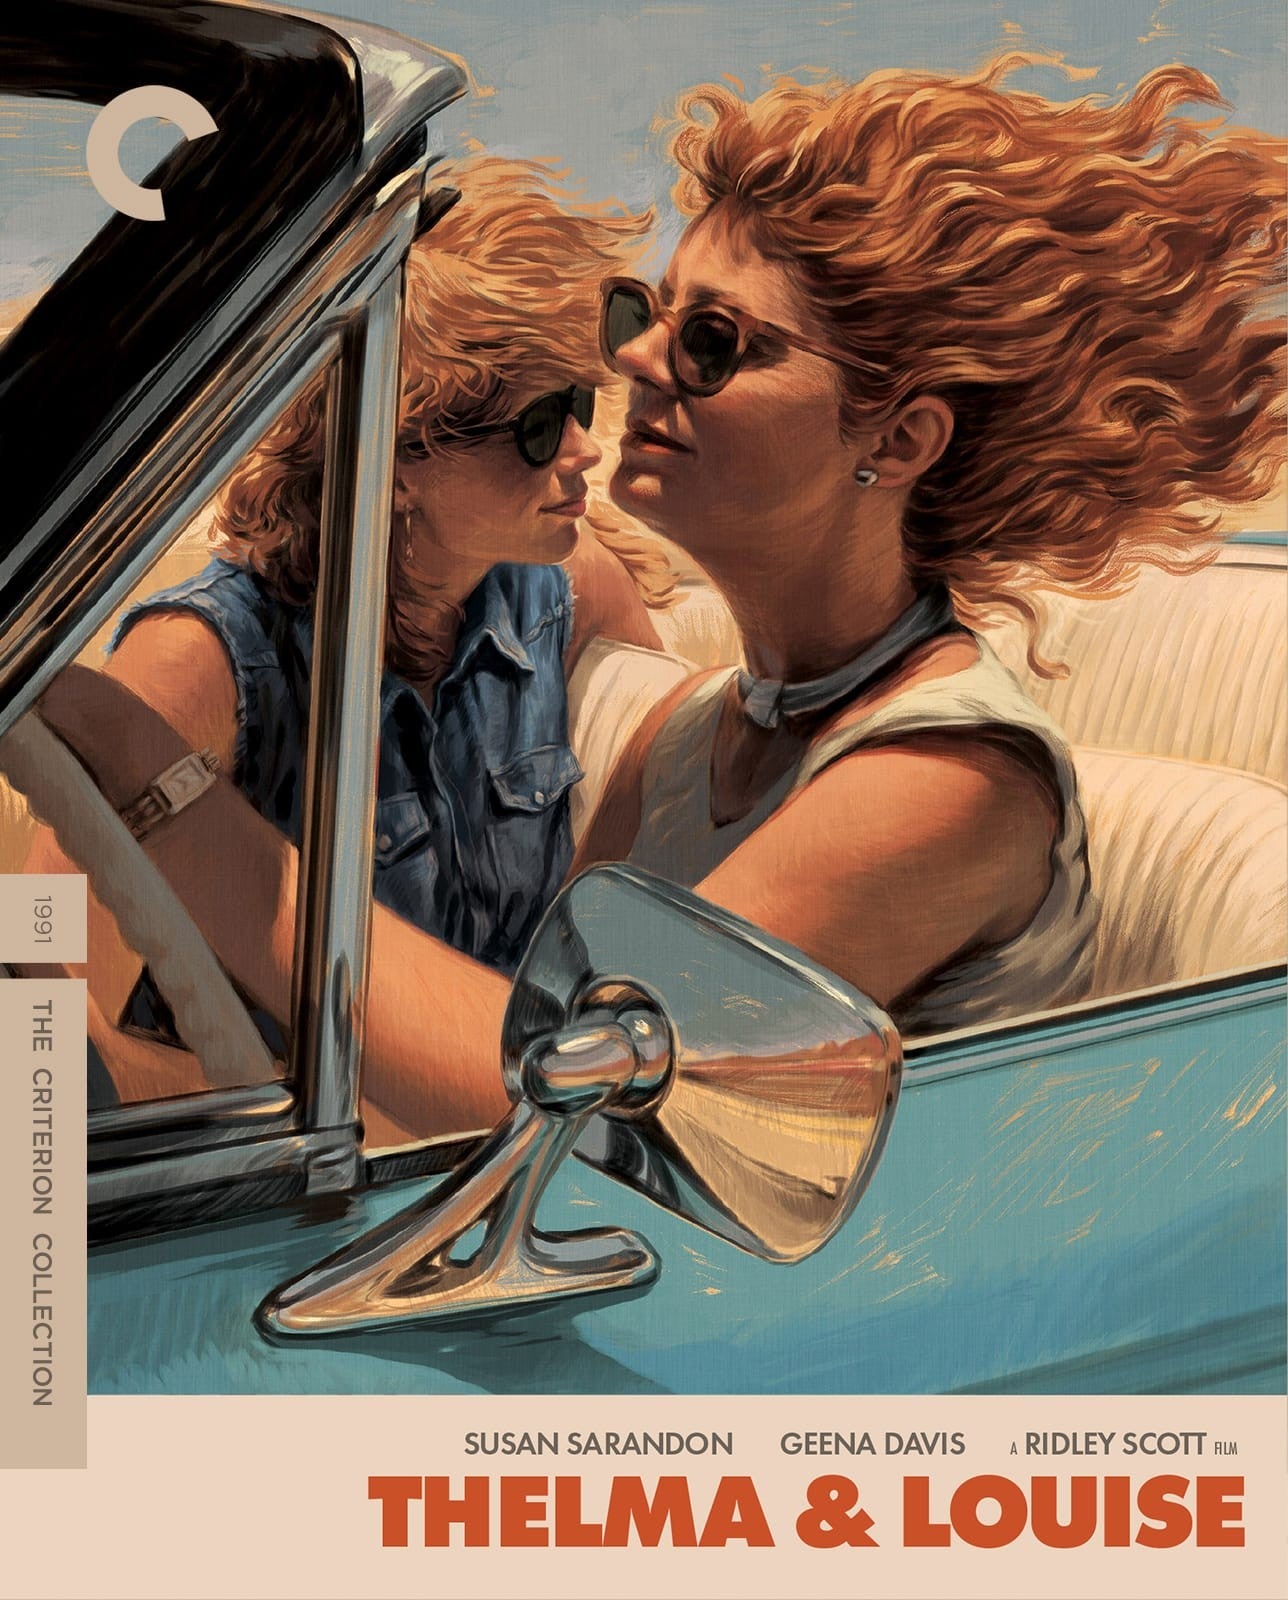 Thelma & Louise 4K UHD + Blu-ray with Slipcase (Criterion)